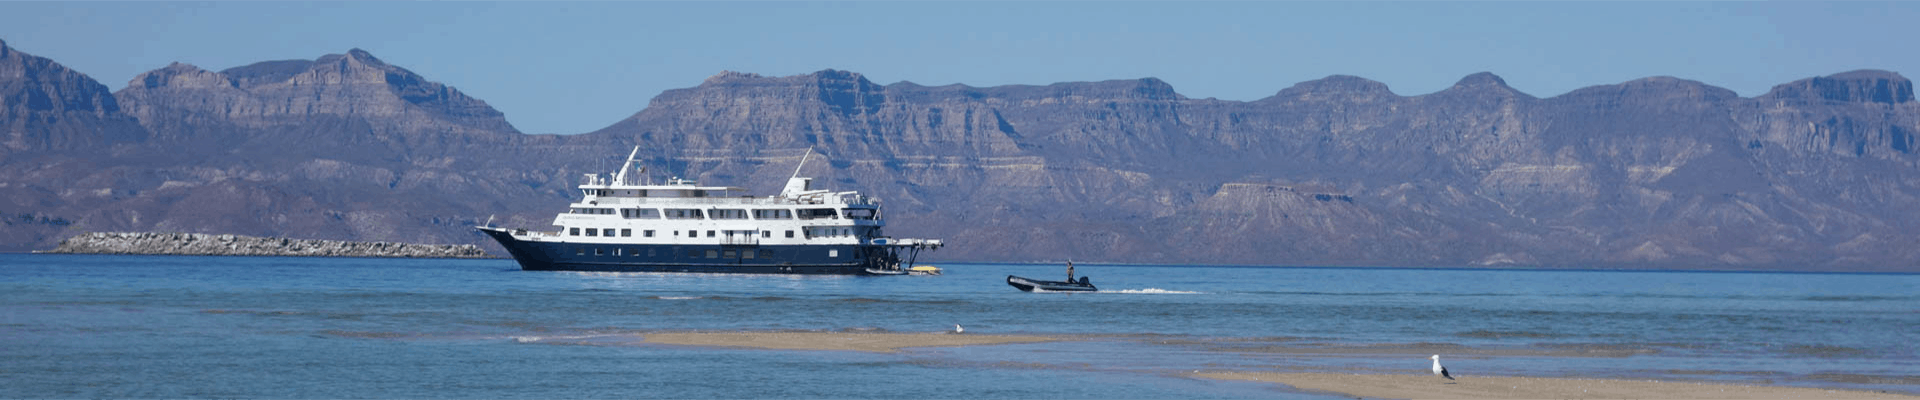 A small ship cruise seen from the shore with Baja mountains behind it.